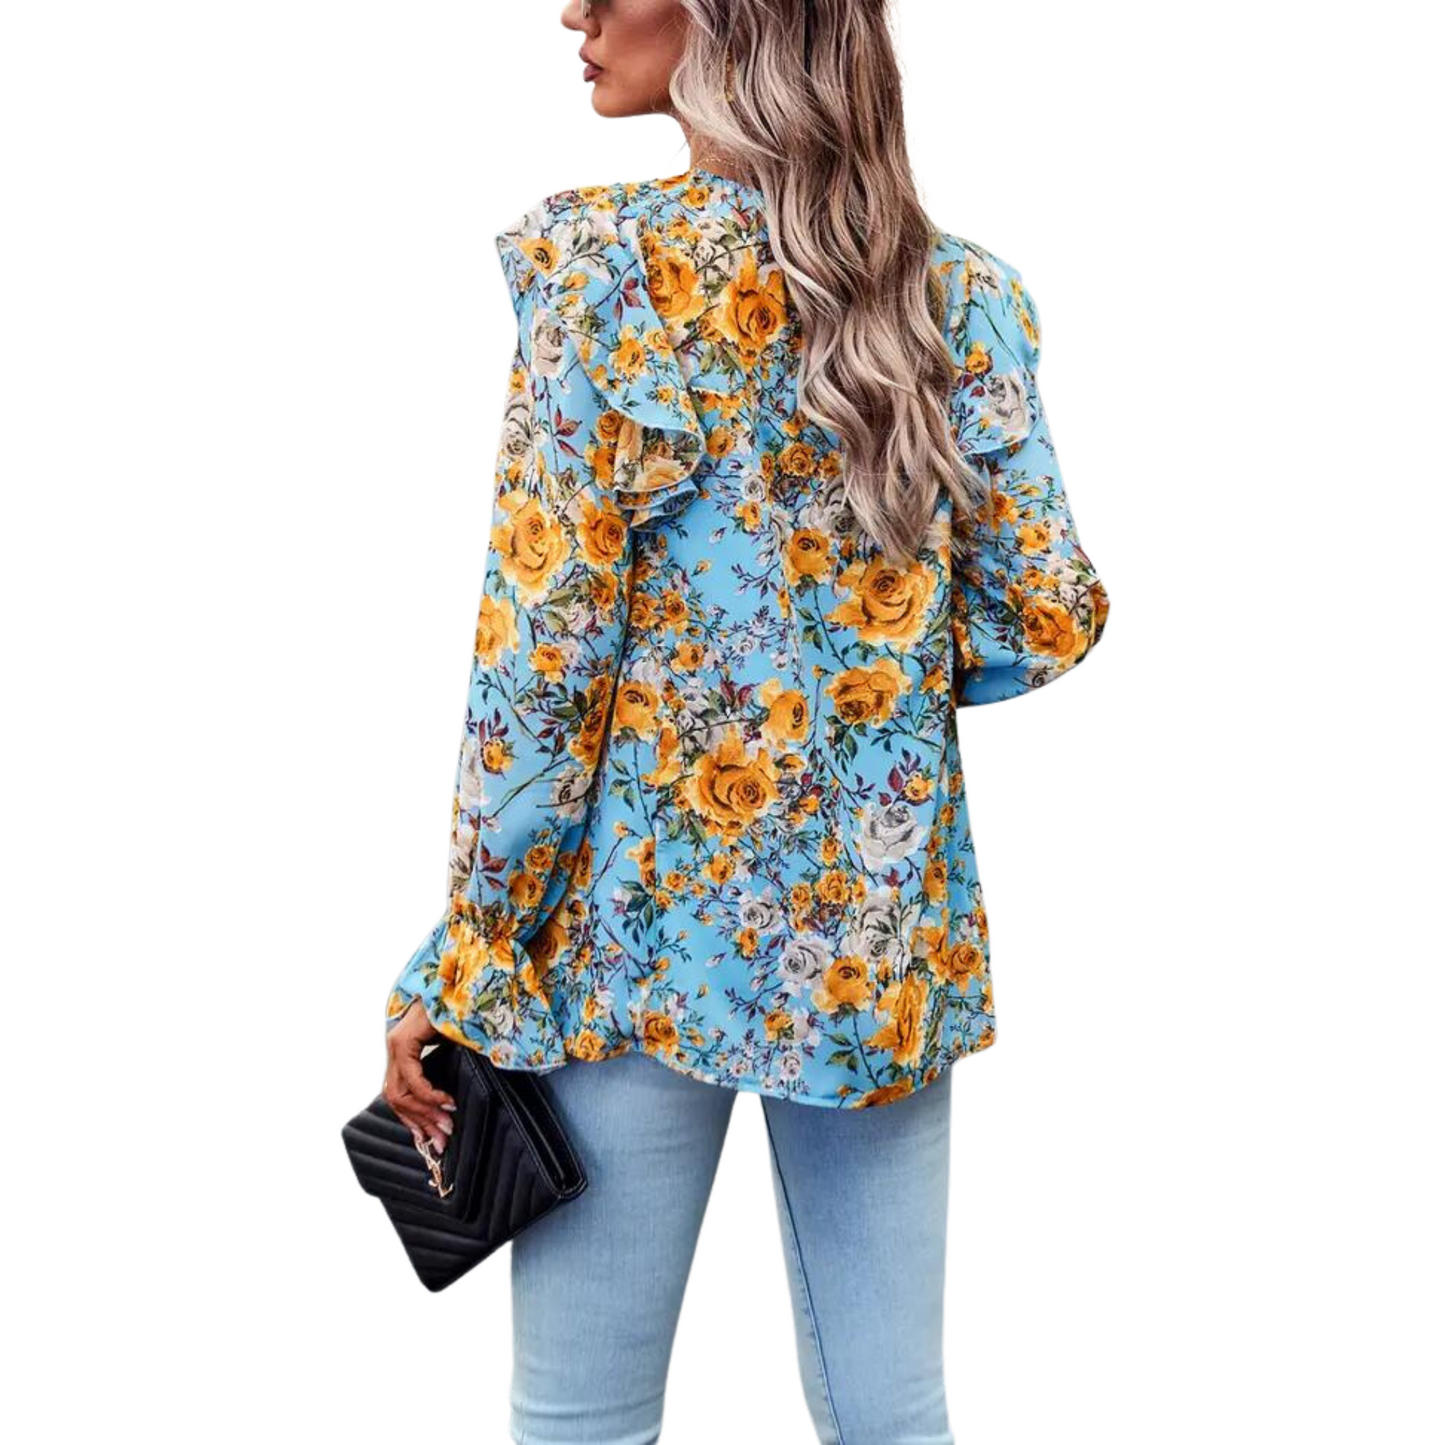 This Floral Print Ruffle Trimmed Top is a beautiful and stylish addition to any wardrobe. The top features long sleeves with a bright floral print, a smocked neck, and ruffle trim. With its flattering design and beautiful colors, this top will lend a touch of femininity to any outfit.